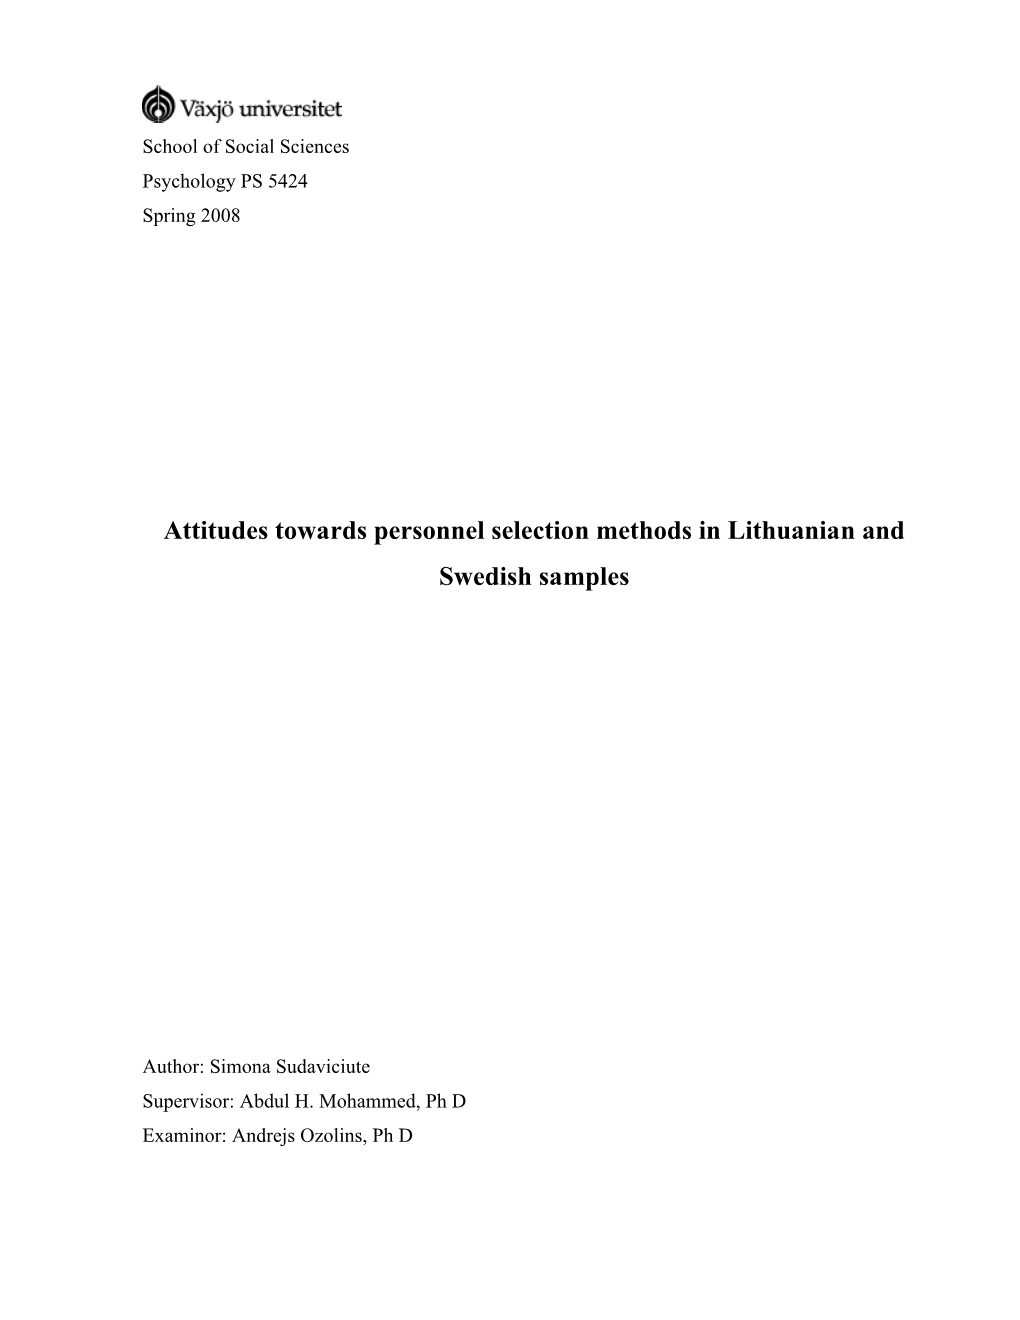 Attitudes Towards Personnel Selection Methods in Lithuanian and Swedish Samples